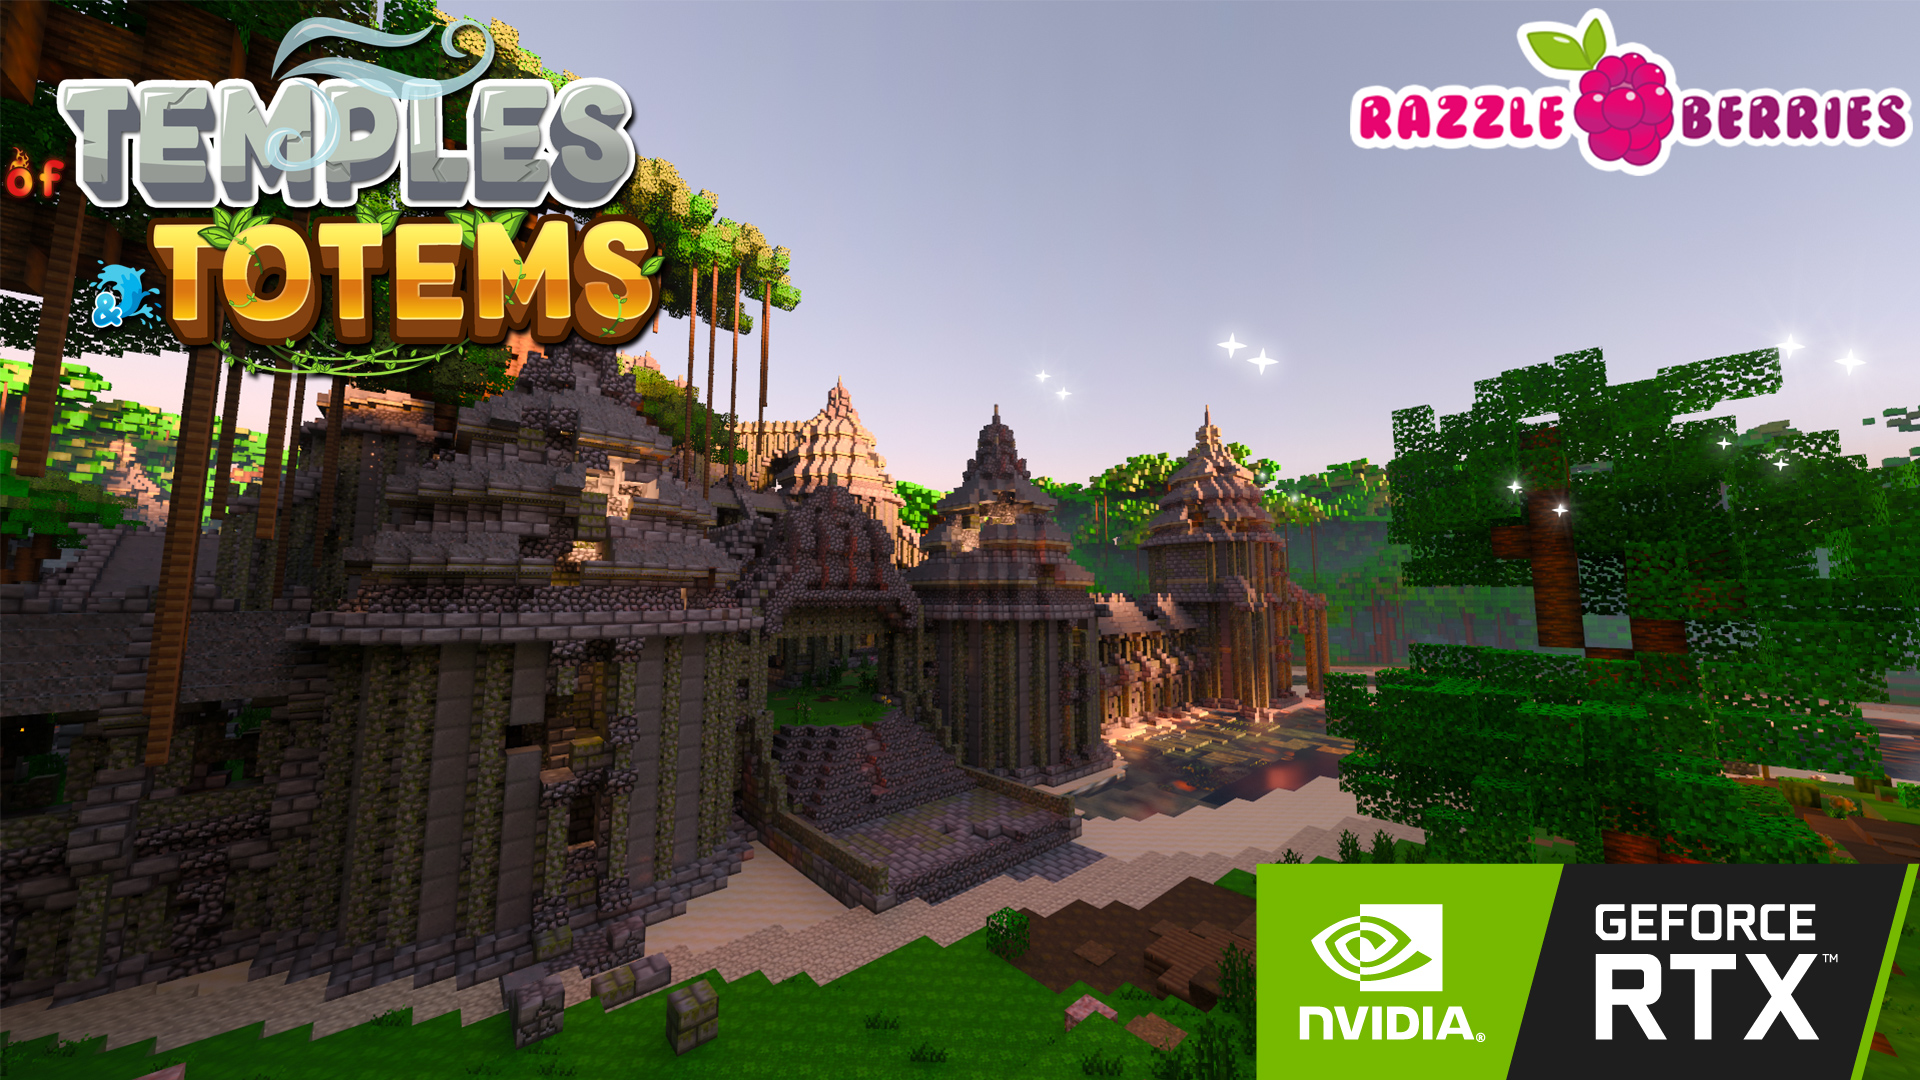 Nvidia releases 5 more free ray-traced Minecraft worlds